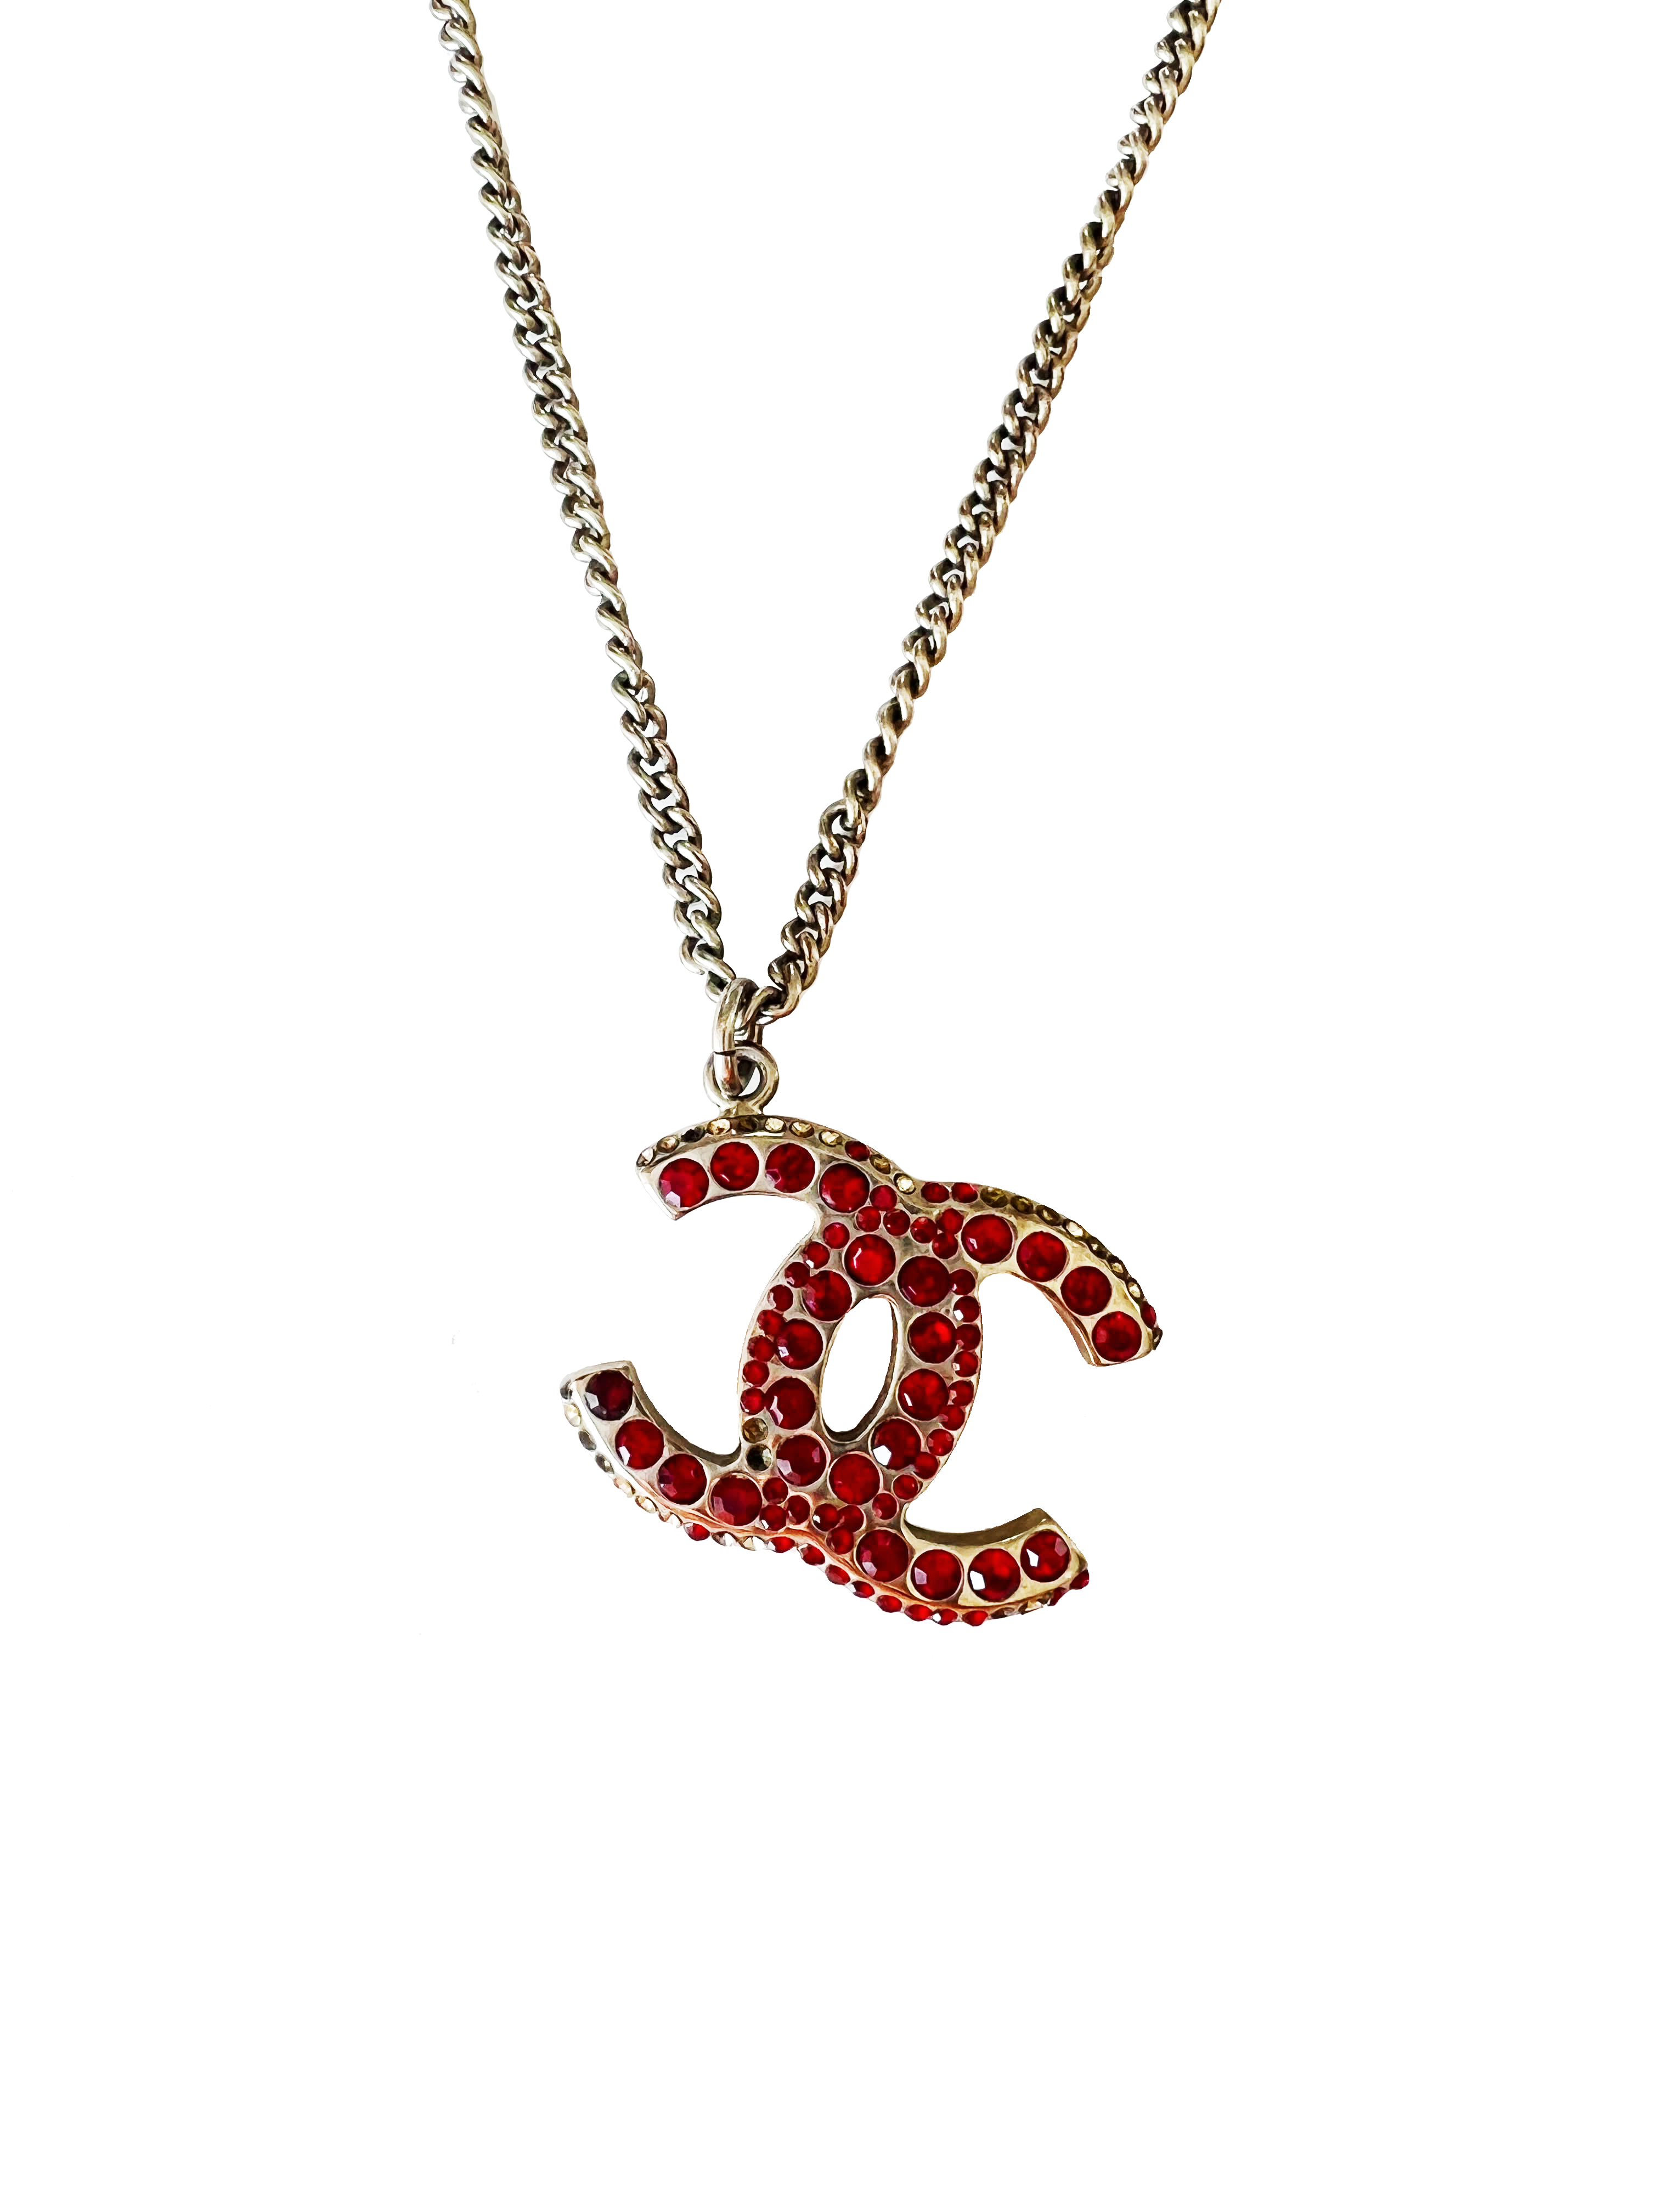 Chanel Enamel CC Necklace Pink Pendant Gold Tone 17A – Coco Approved Studio